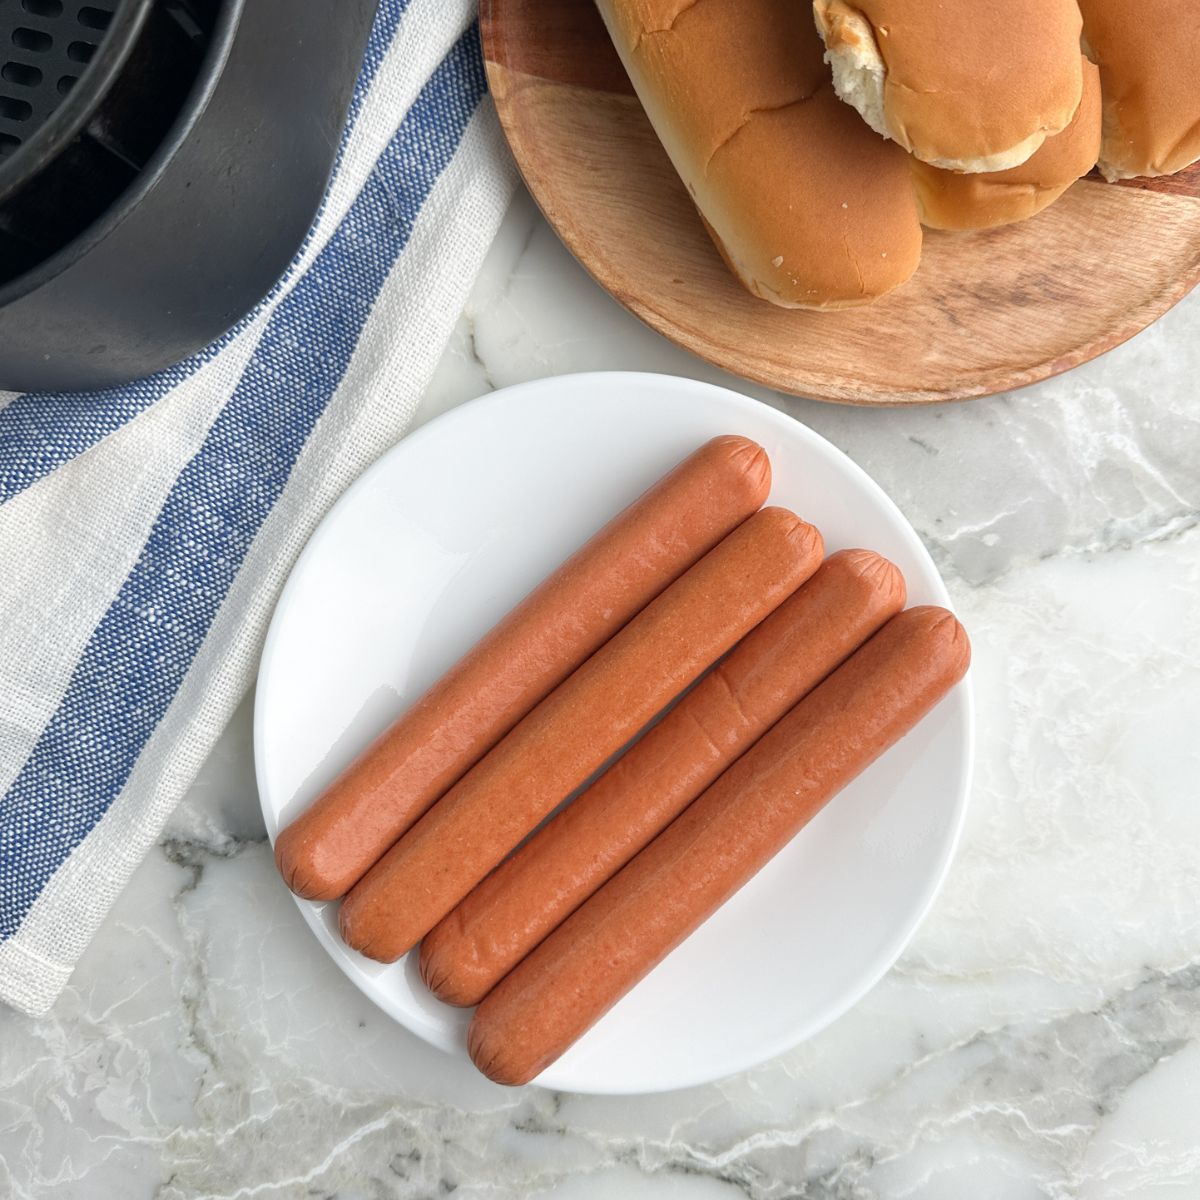 Plate of hot dogs, buns, and air fryer basket.